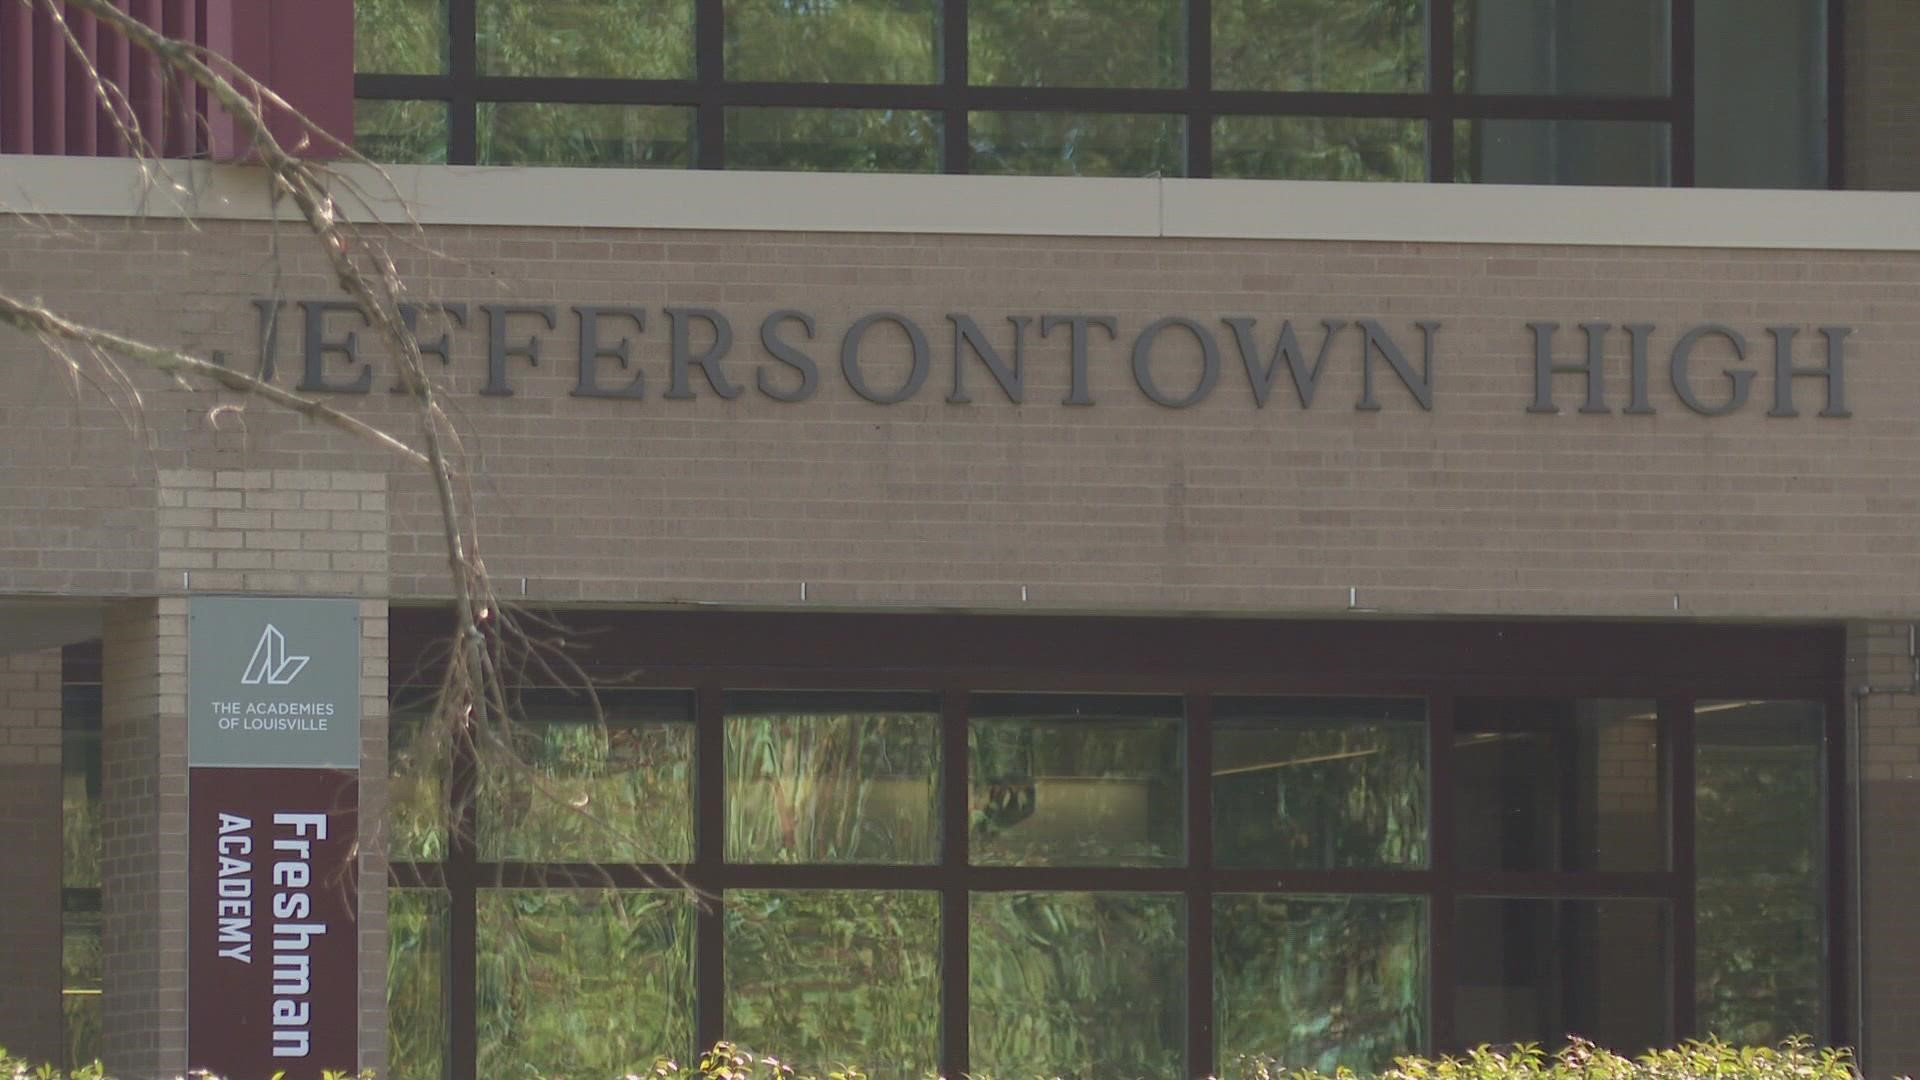 Jeffersontown High School sent a letter to parents saying Kentucky State Police notified school officials that a former student made a possible threat online.